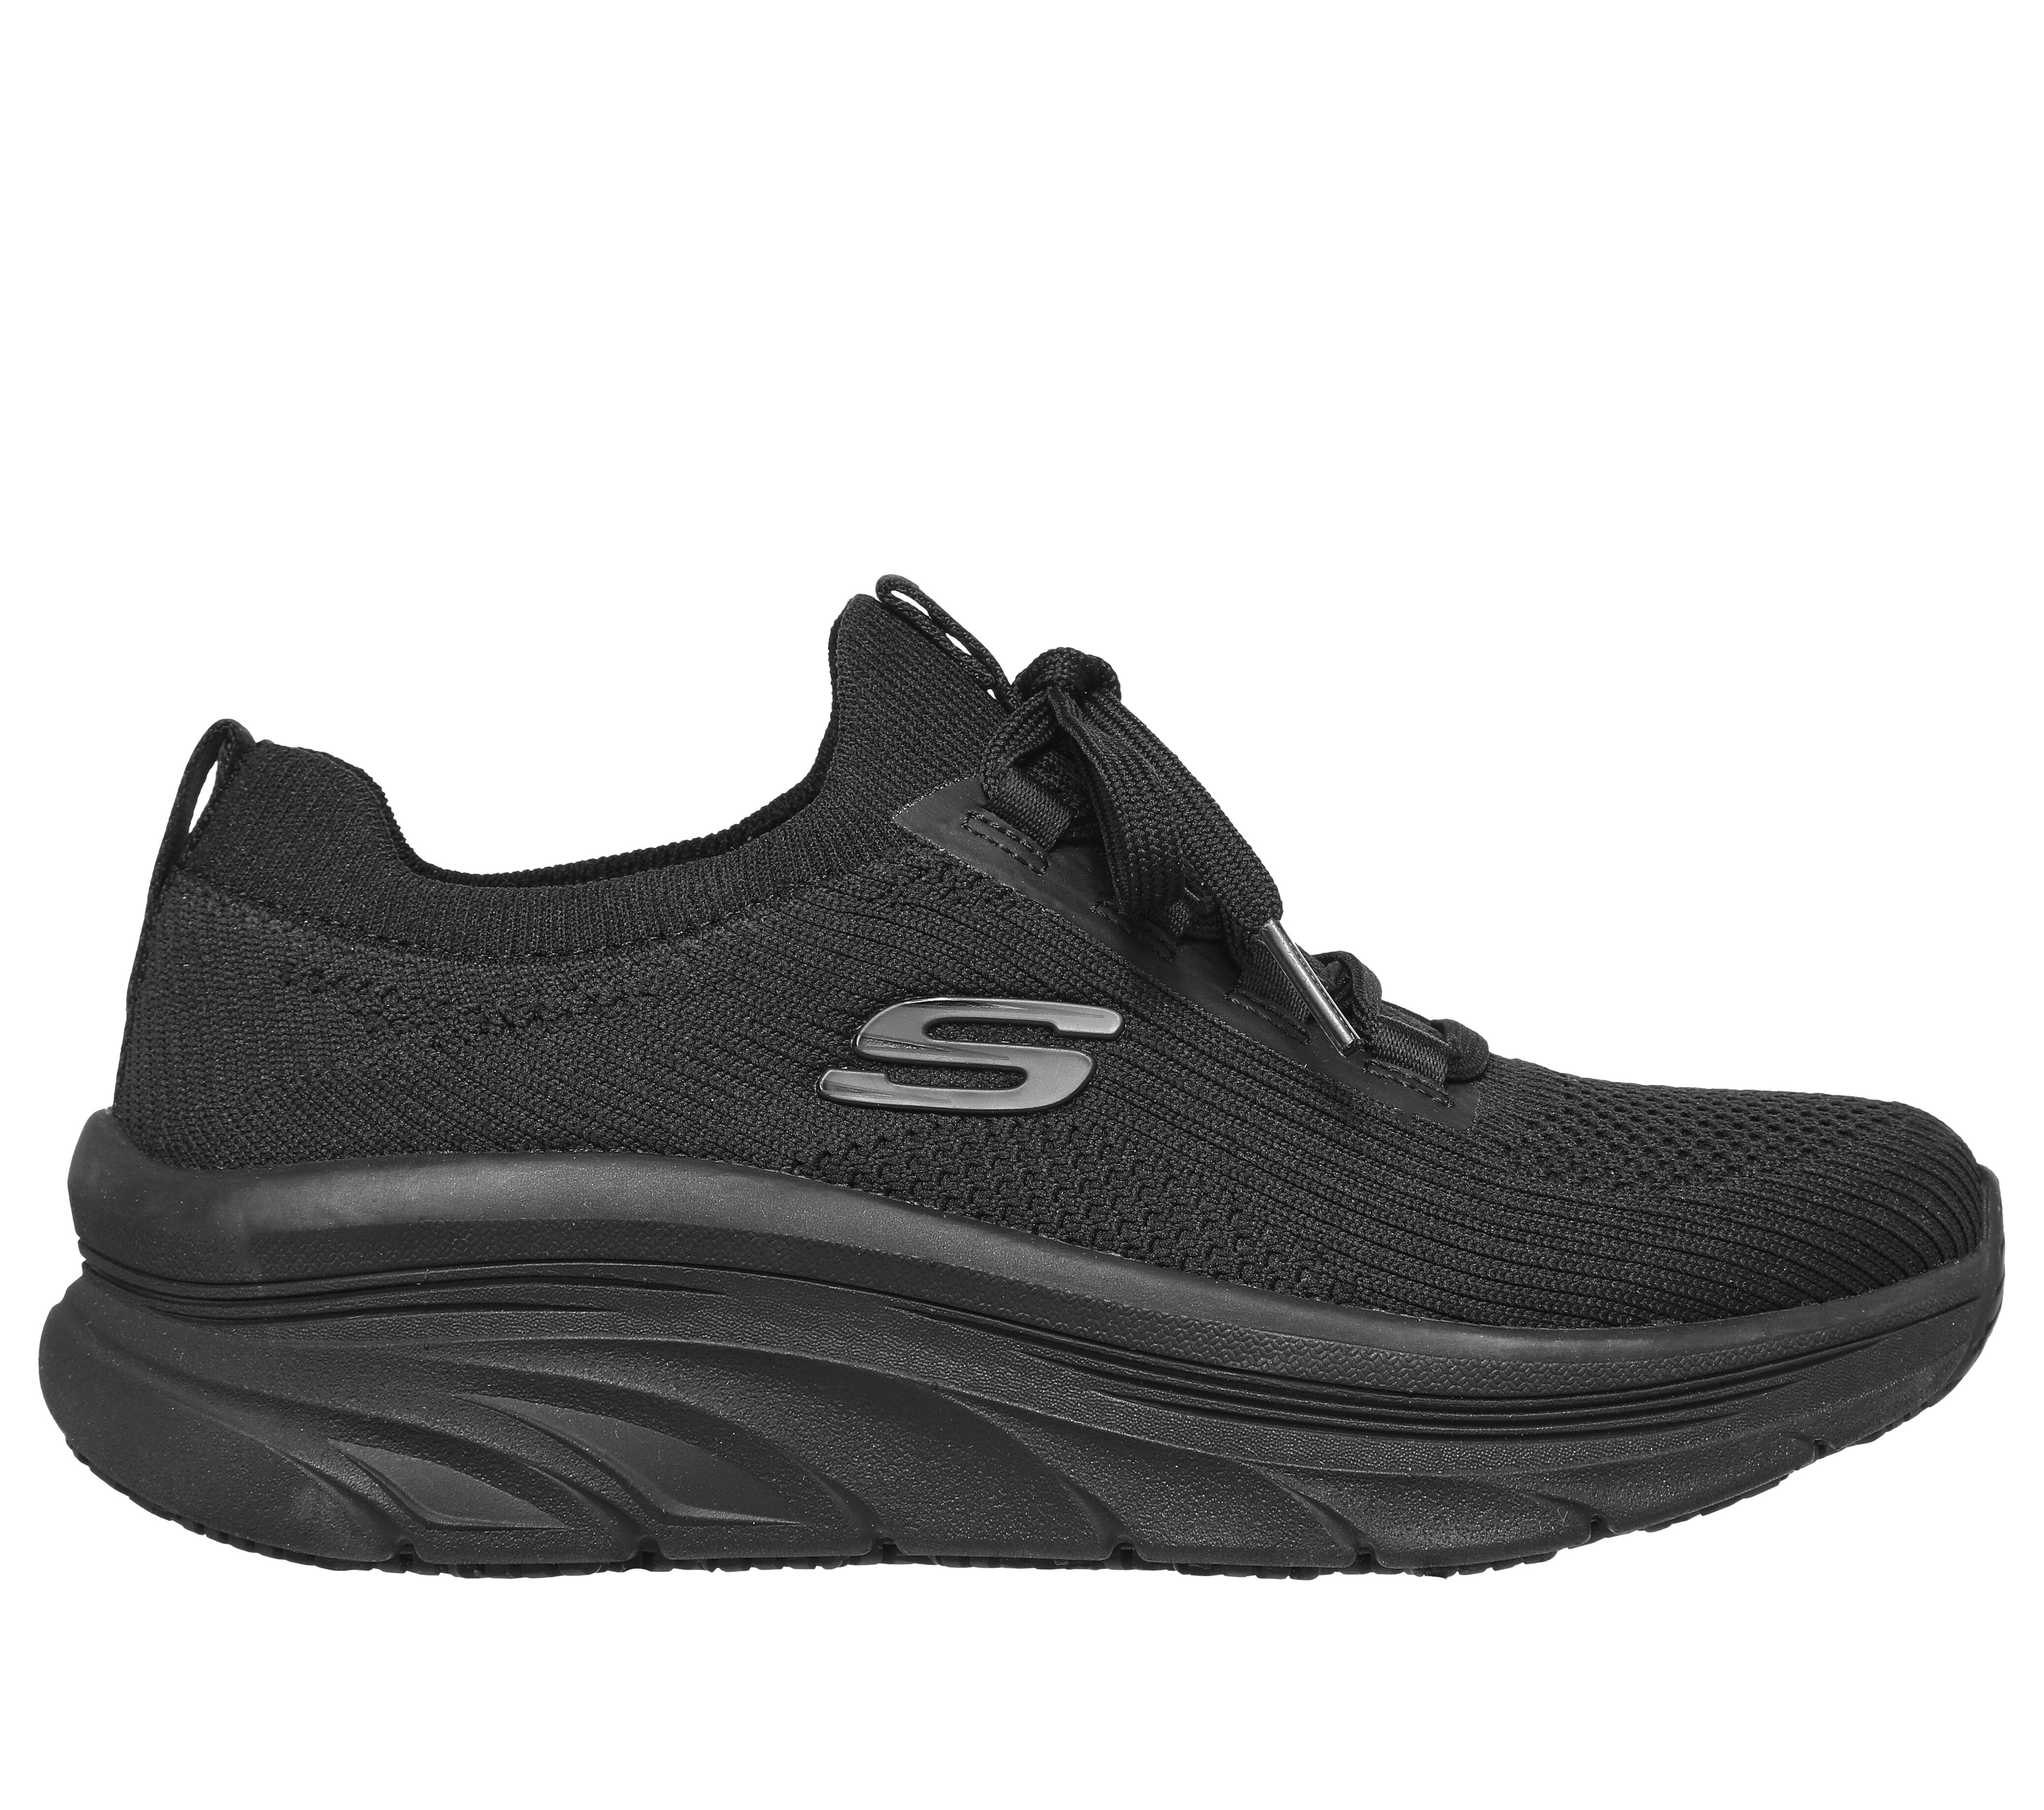 sketchers for women size 12